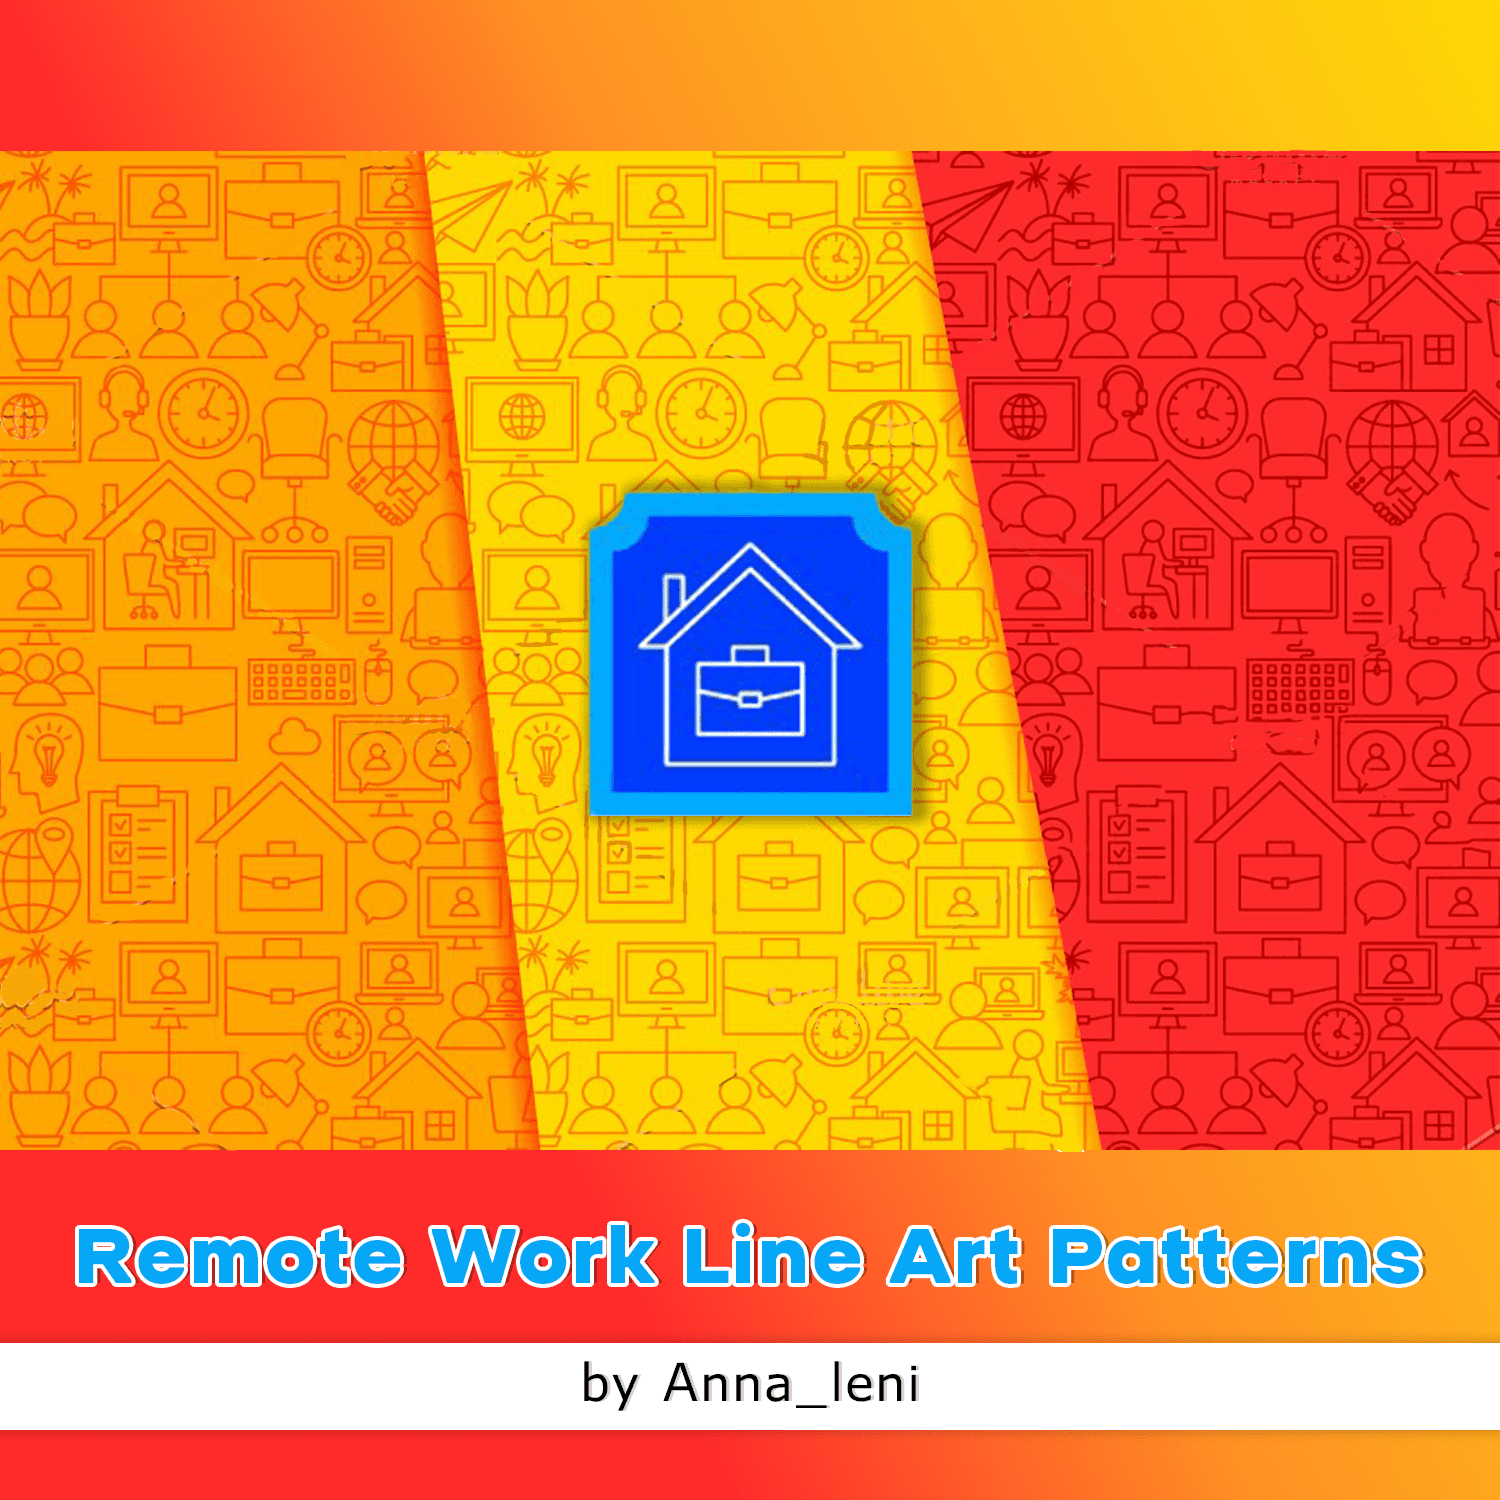 Remote Work Line Art Patterns cover.